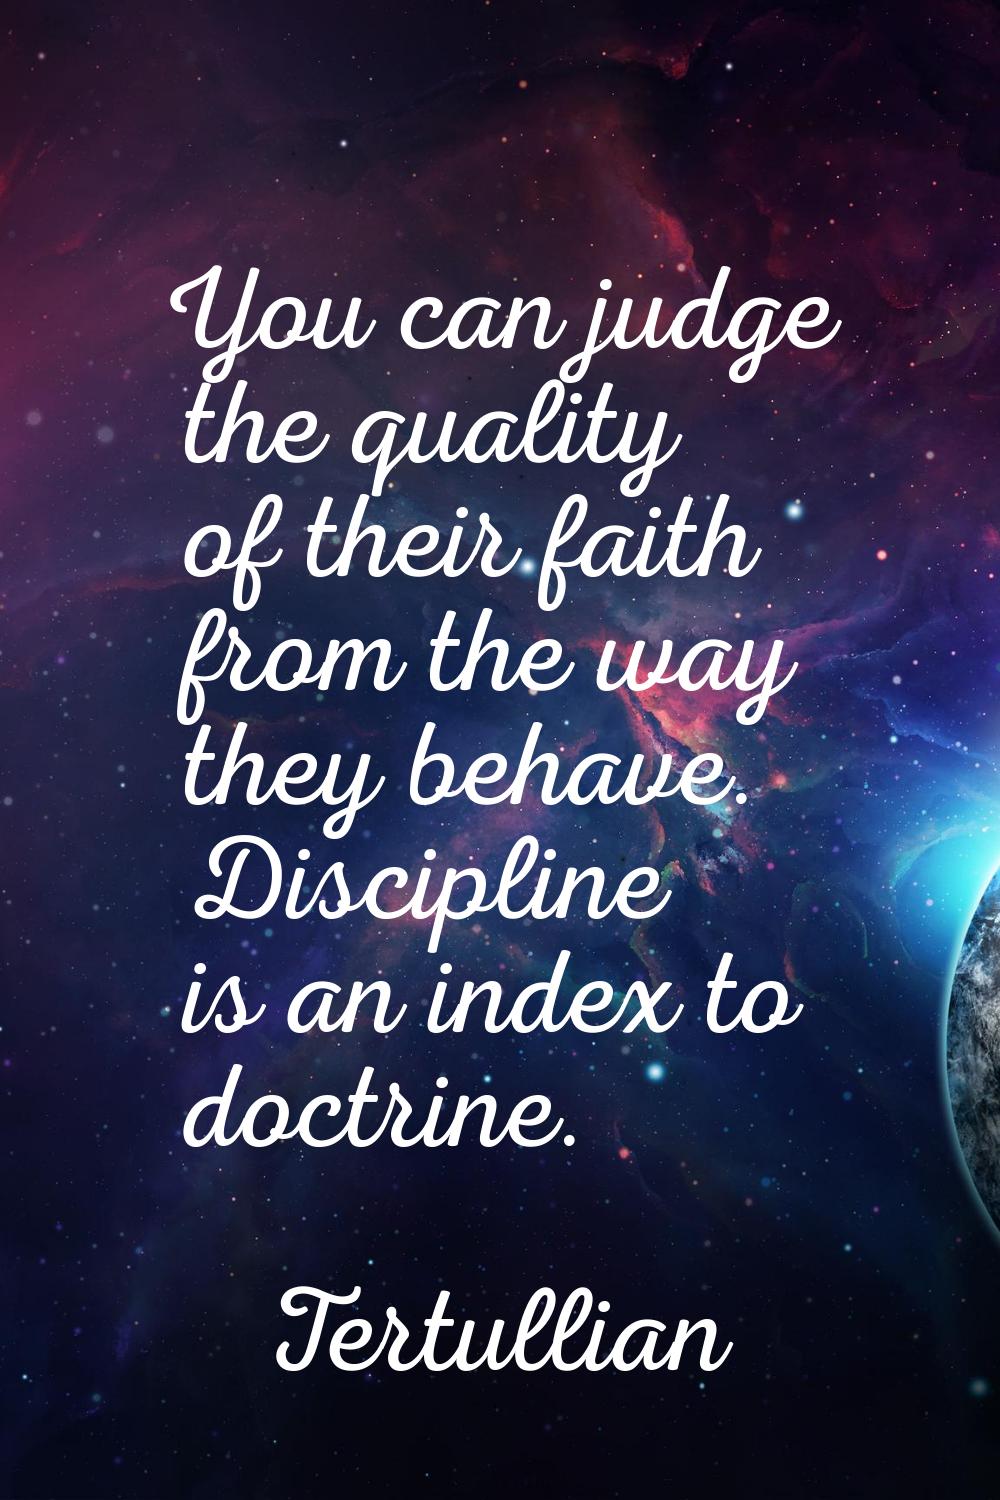 You can judge the quality of their faith from the way they behave. Discipline is an index to doctri